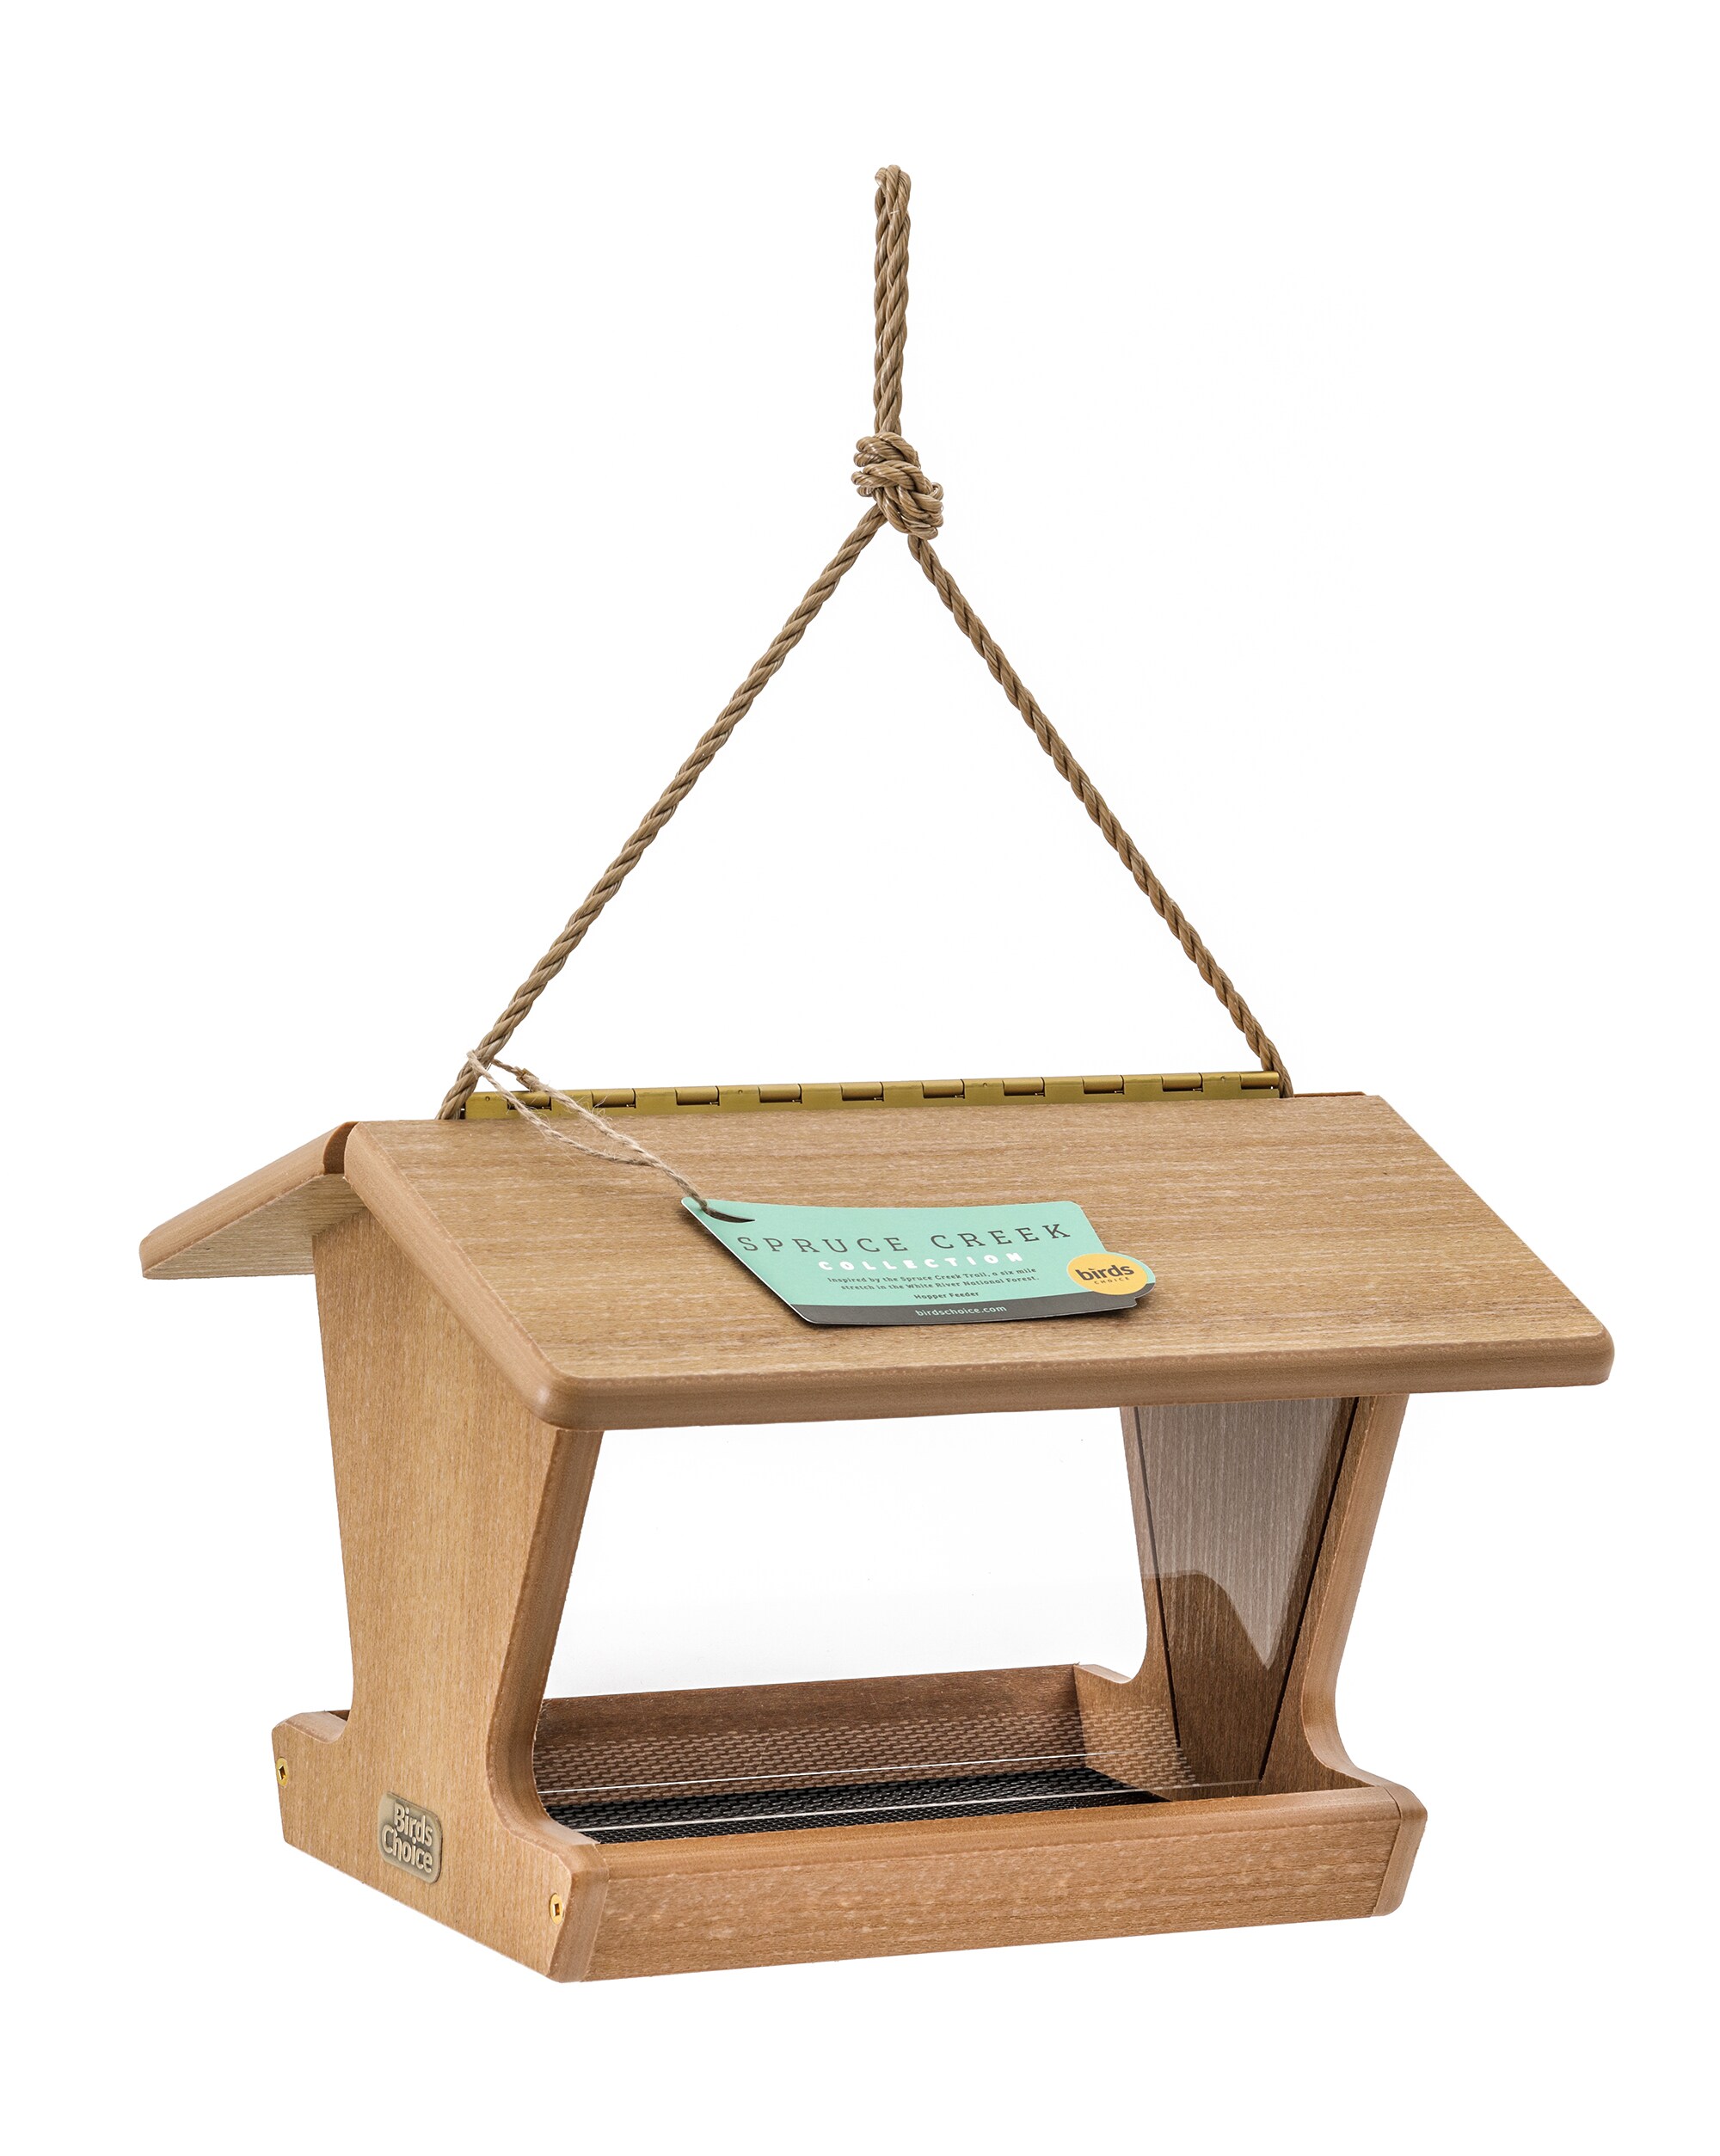 Large Rustic Wood Platform Bird Feeder Has 2 Levels Use as a Hanging Bird  Feeder or Get Optional Pole and Kit for Pole Mounting 